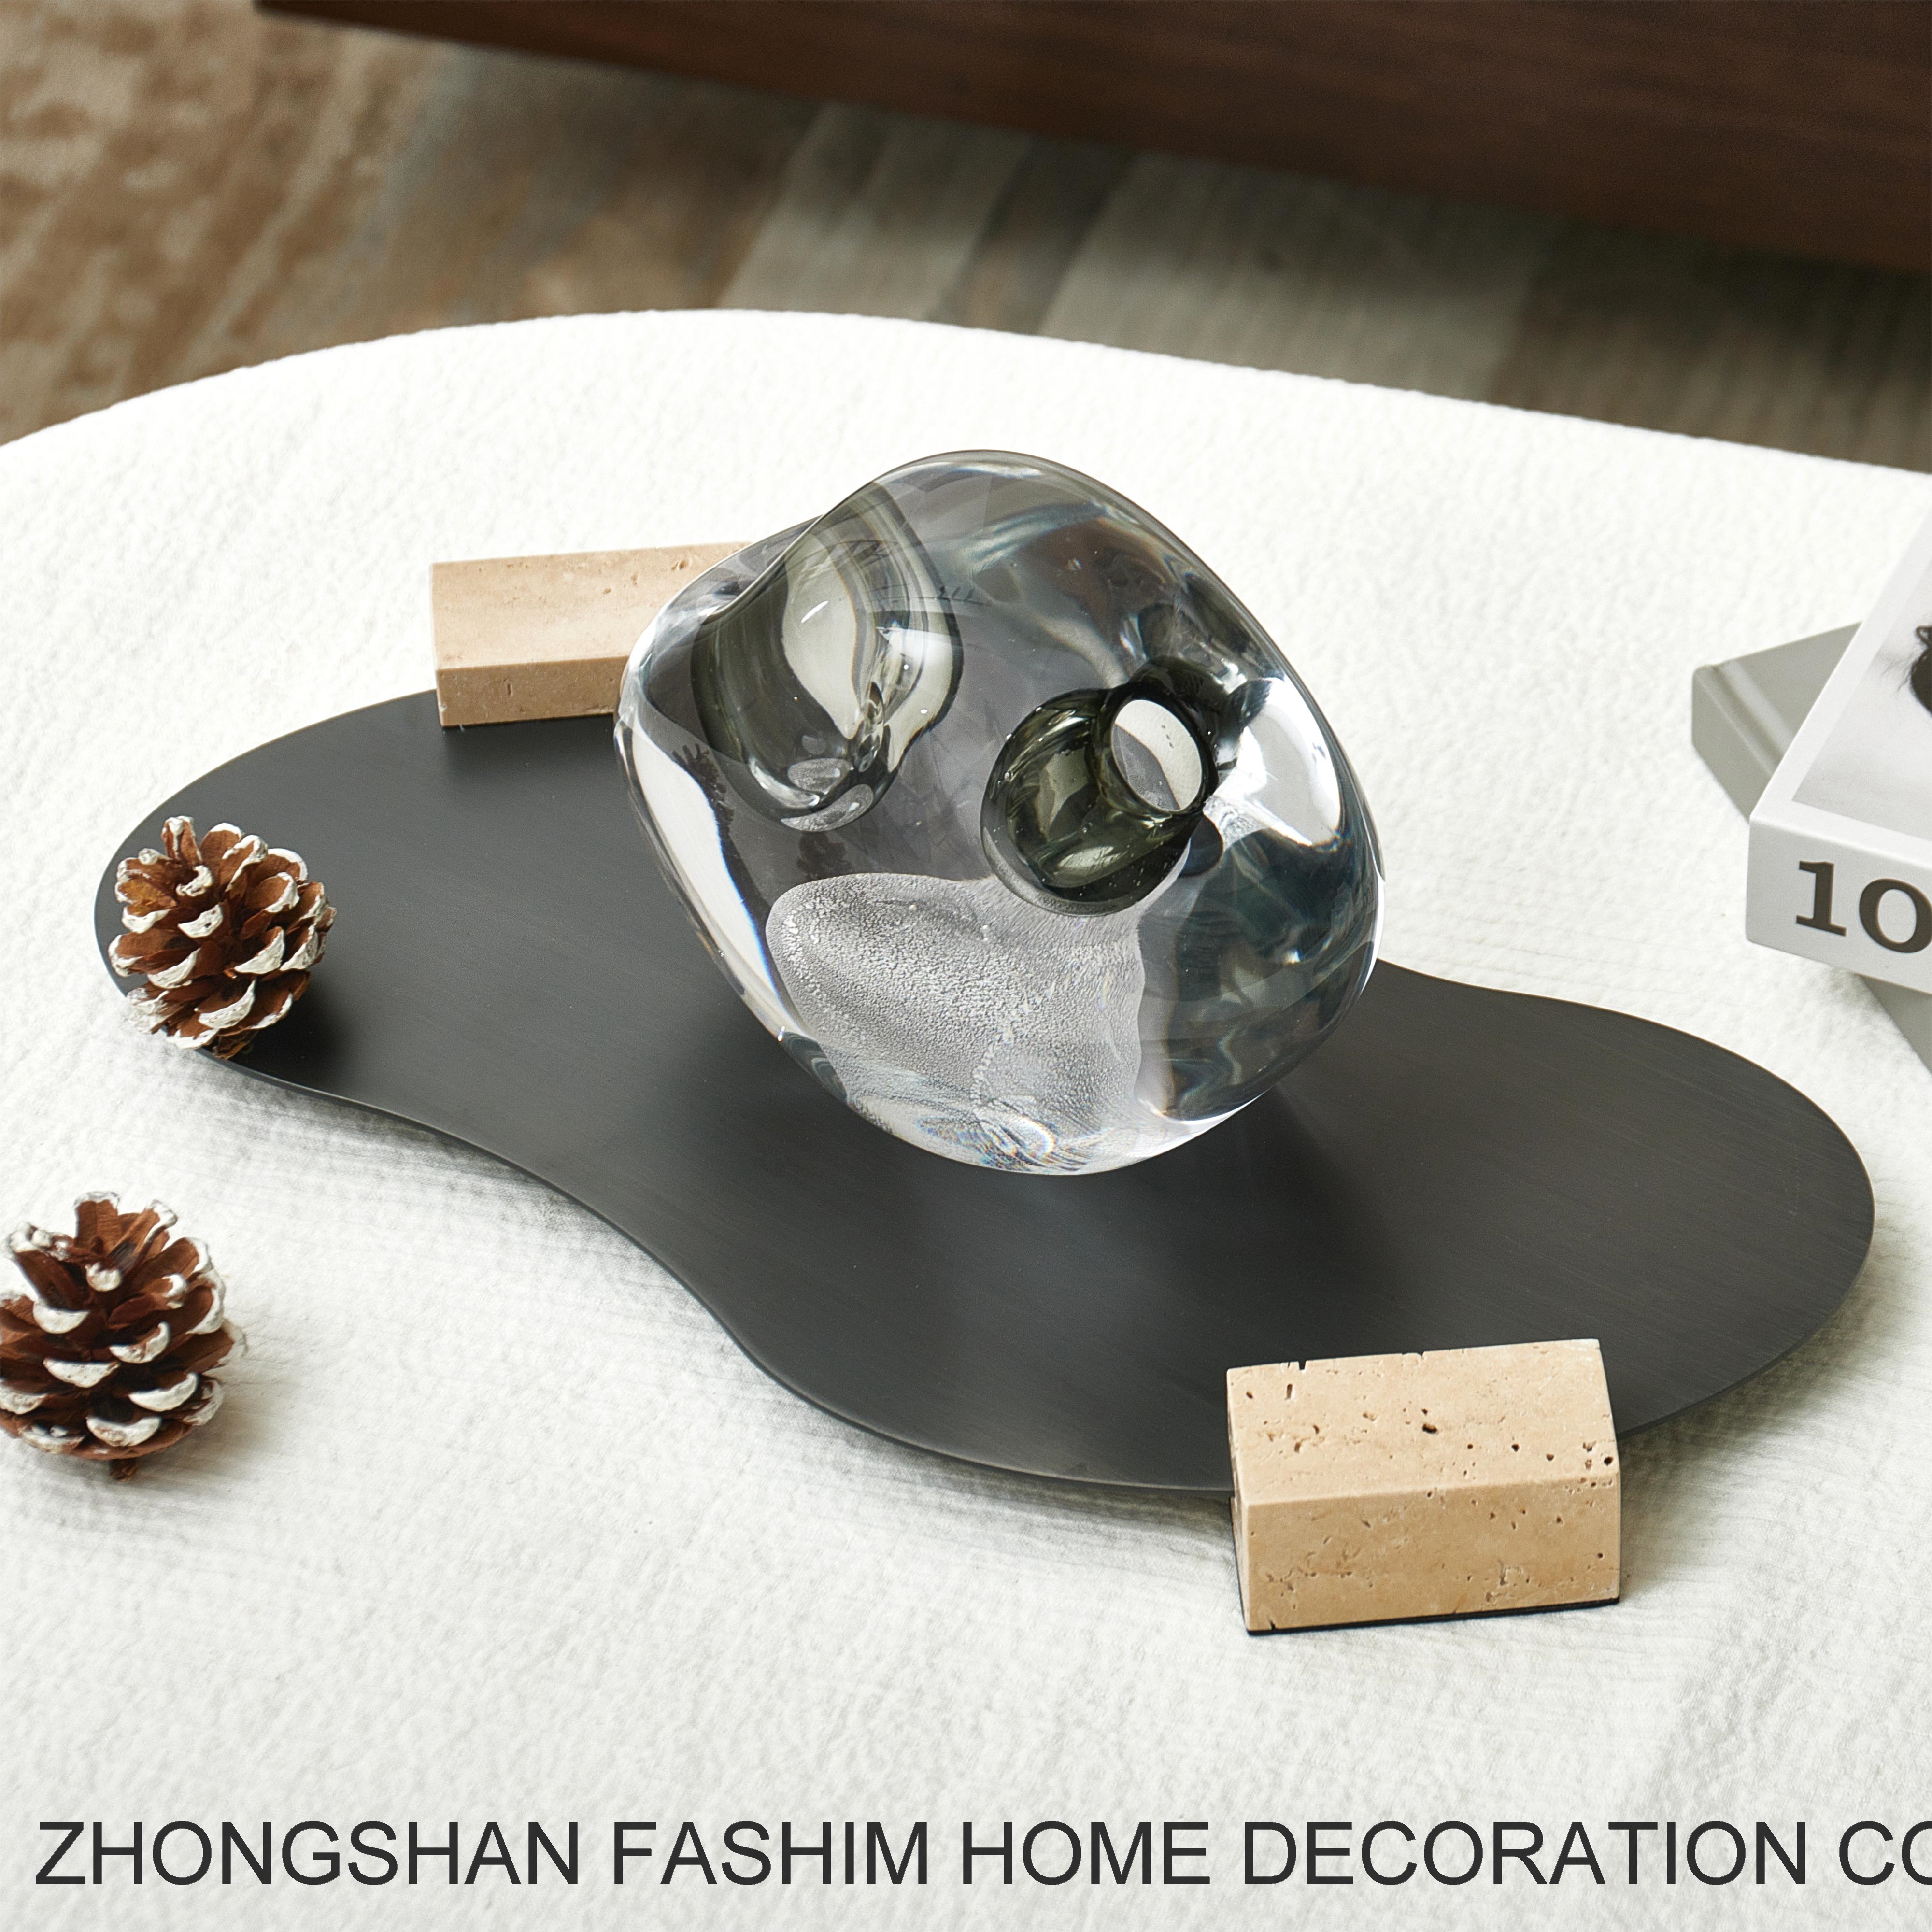 Fashimdecor Stainless steel home decoration tray